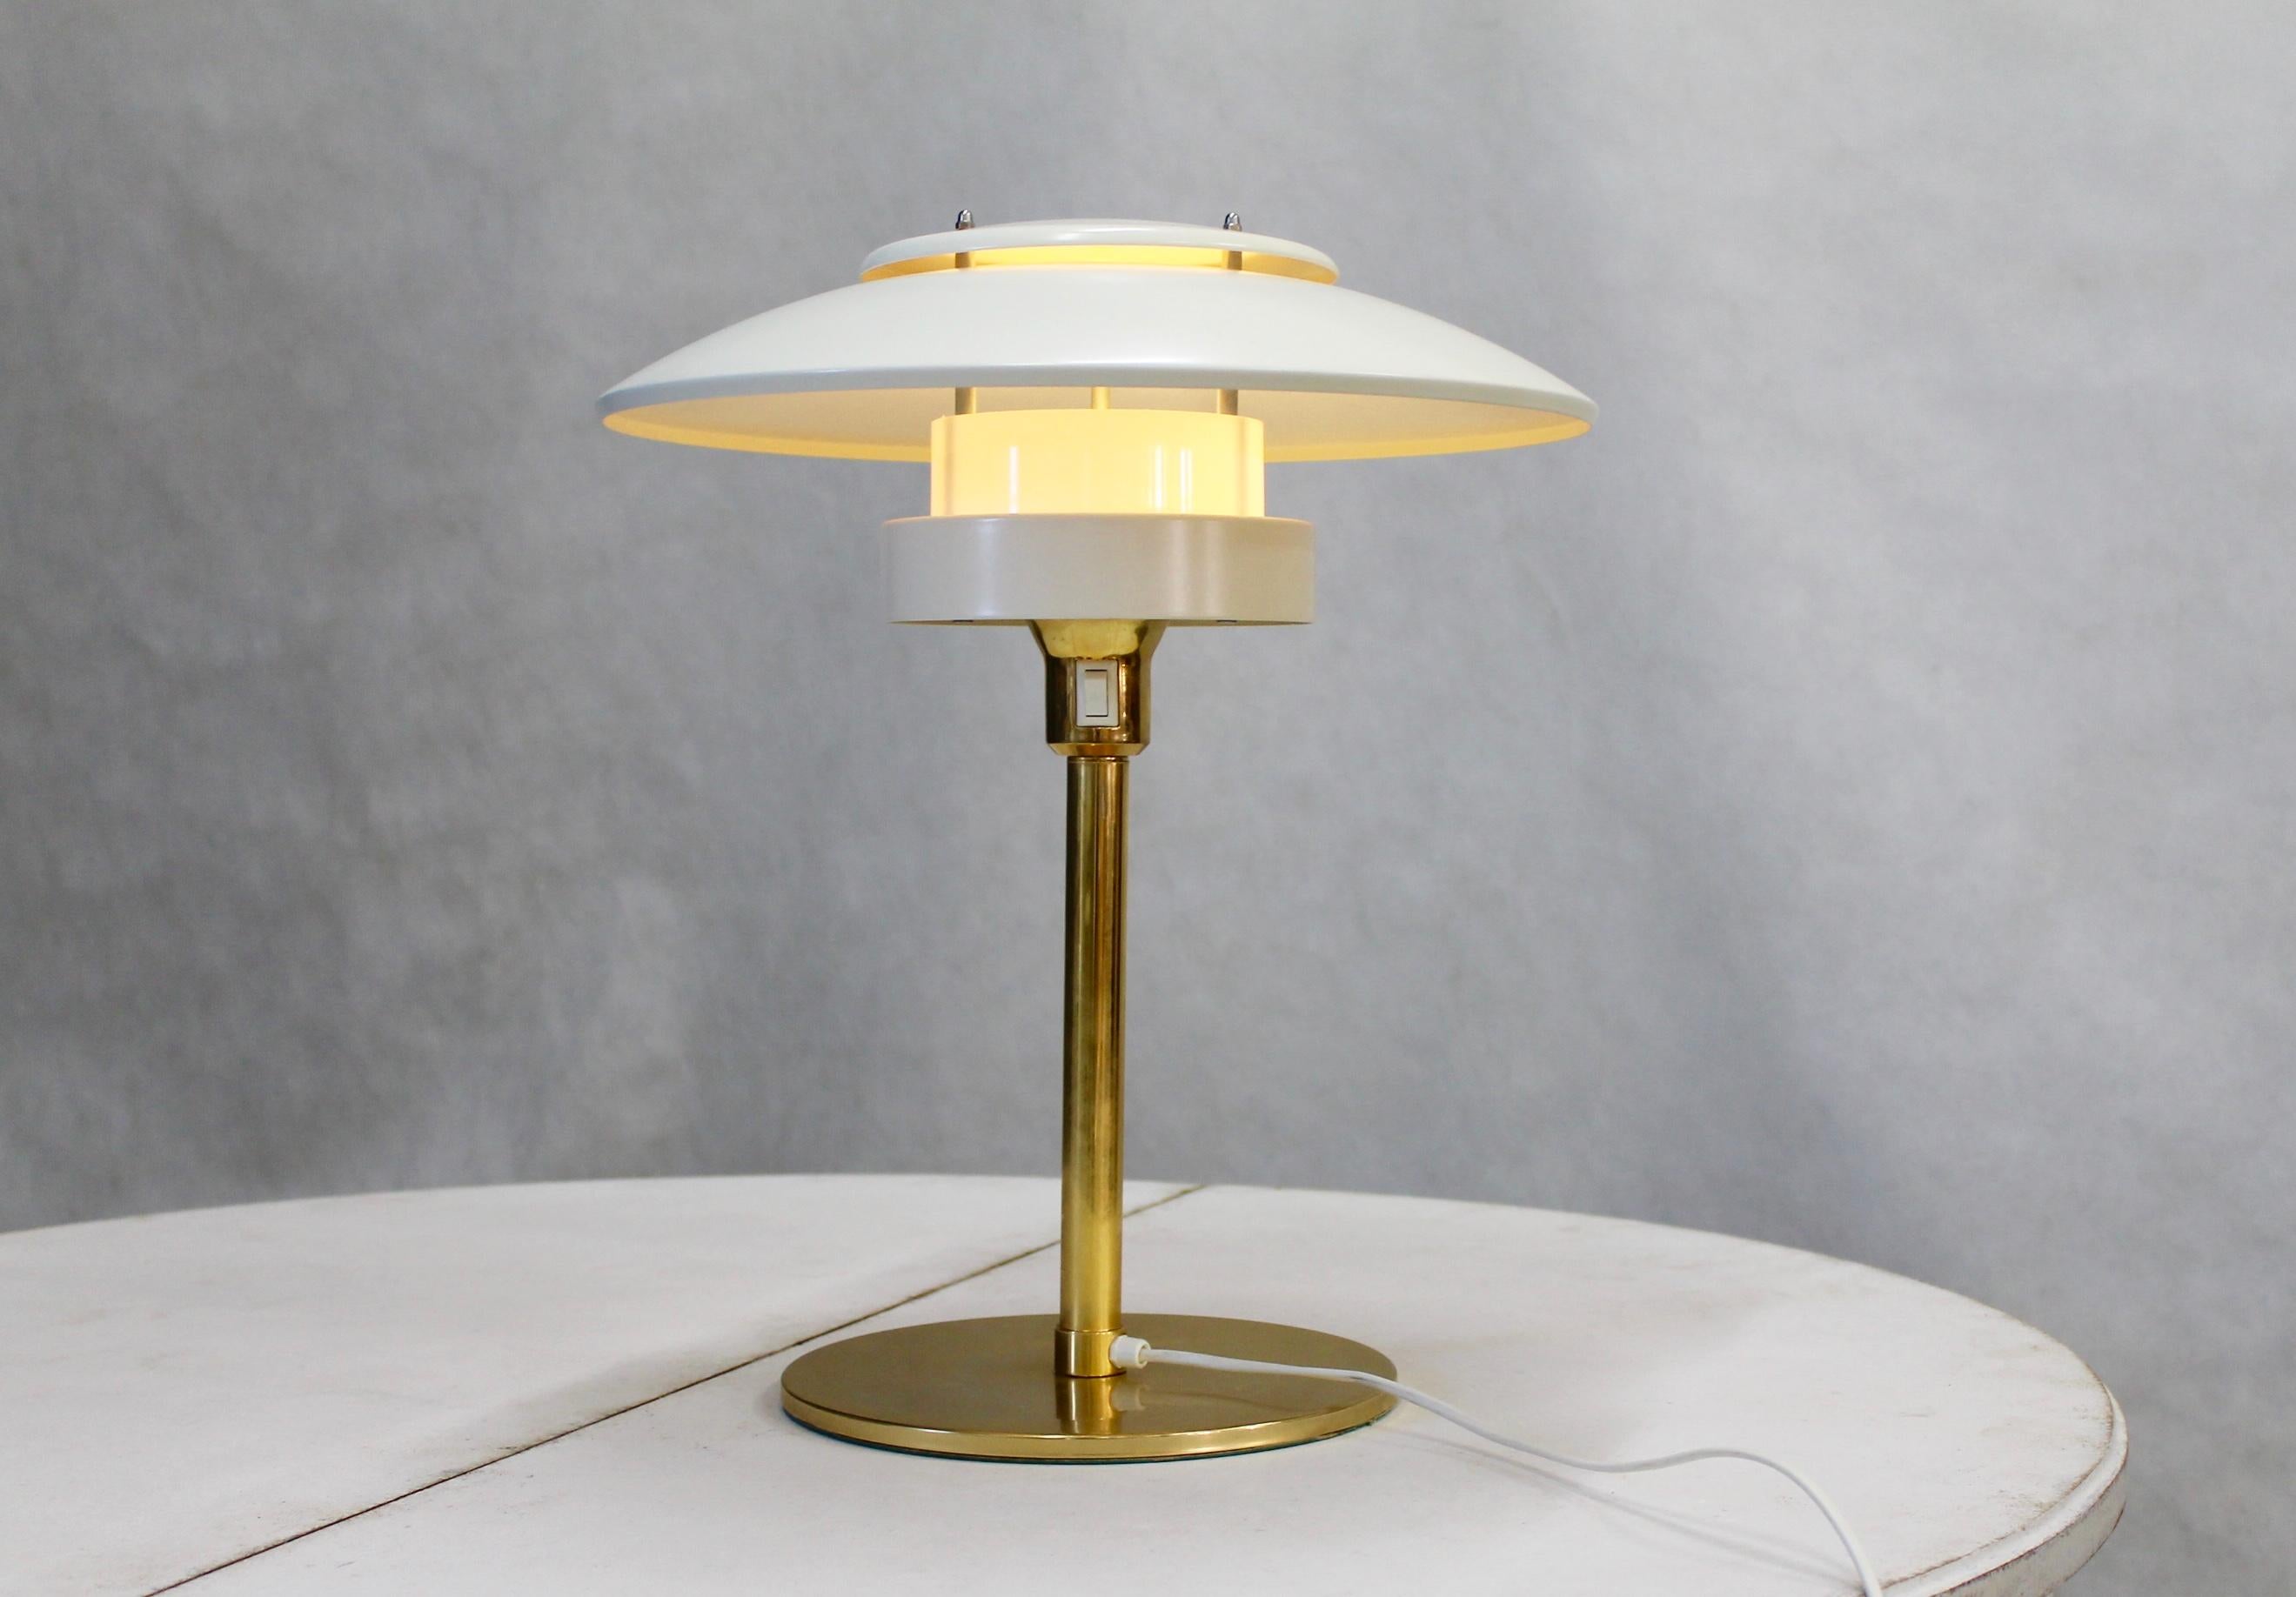 Vintage Design:
- Table lamp by Horn for Light Studio, Model no. 2686
- The lamp is made of brass and chrome-plated metal
- With a shade of white-painted metal
- Diameter of the lamp base 25 cm
- Lampshade diameter 42 cm.